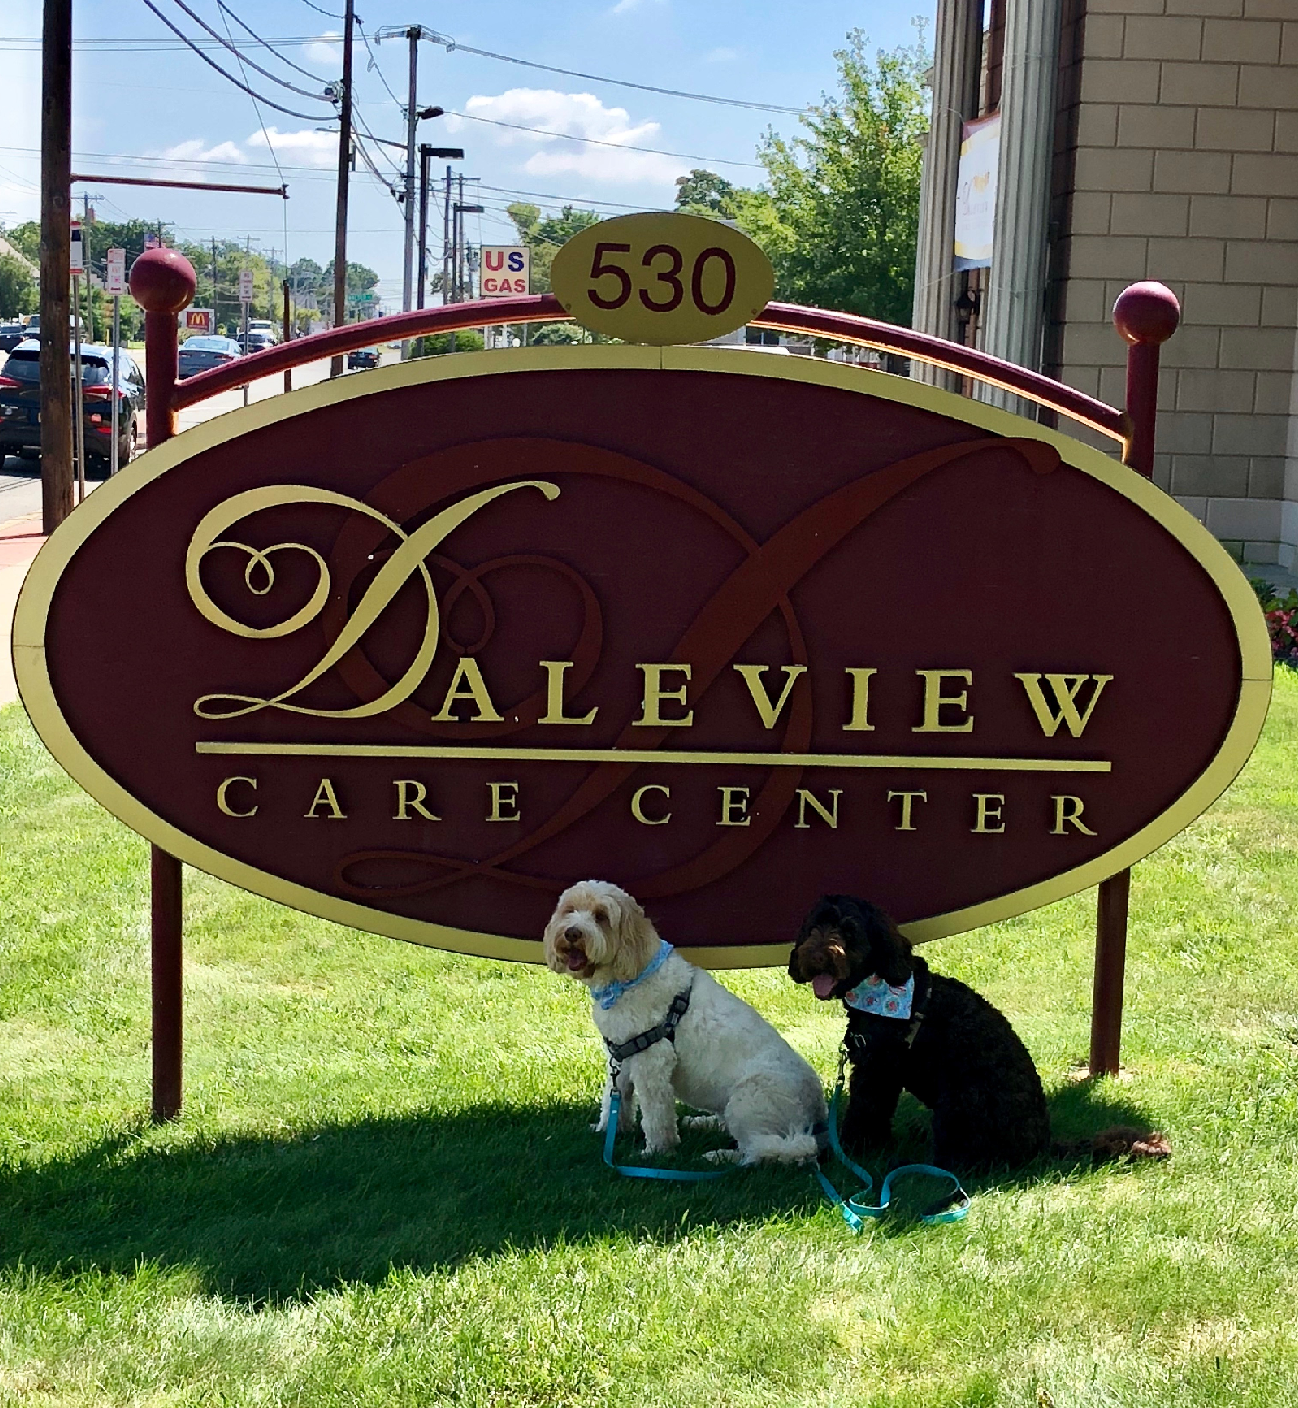 Daleview Care Center Photo